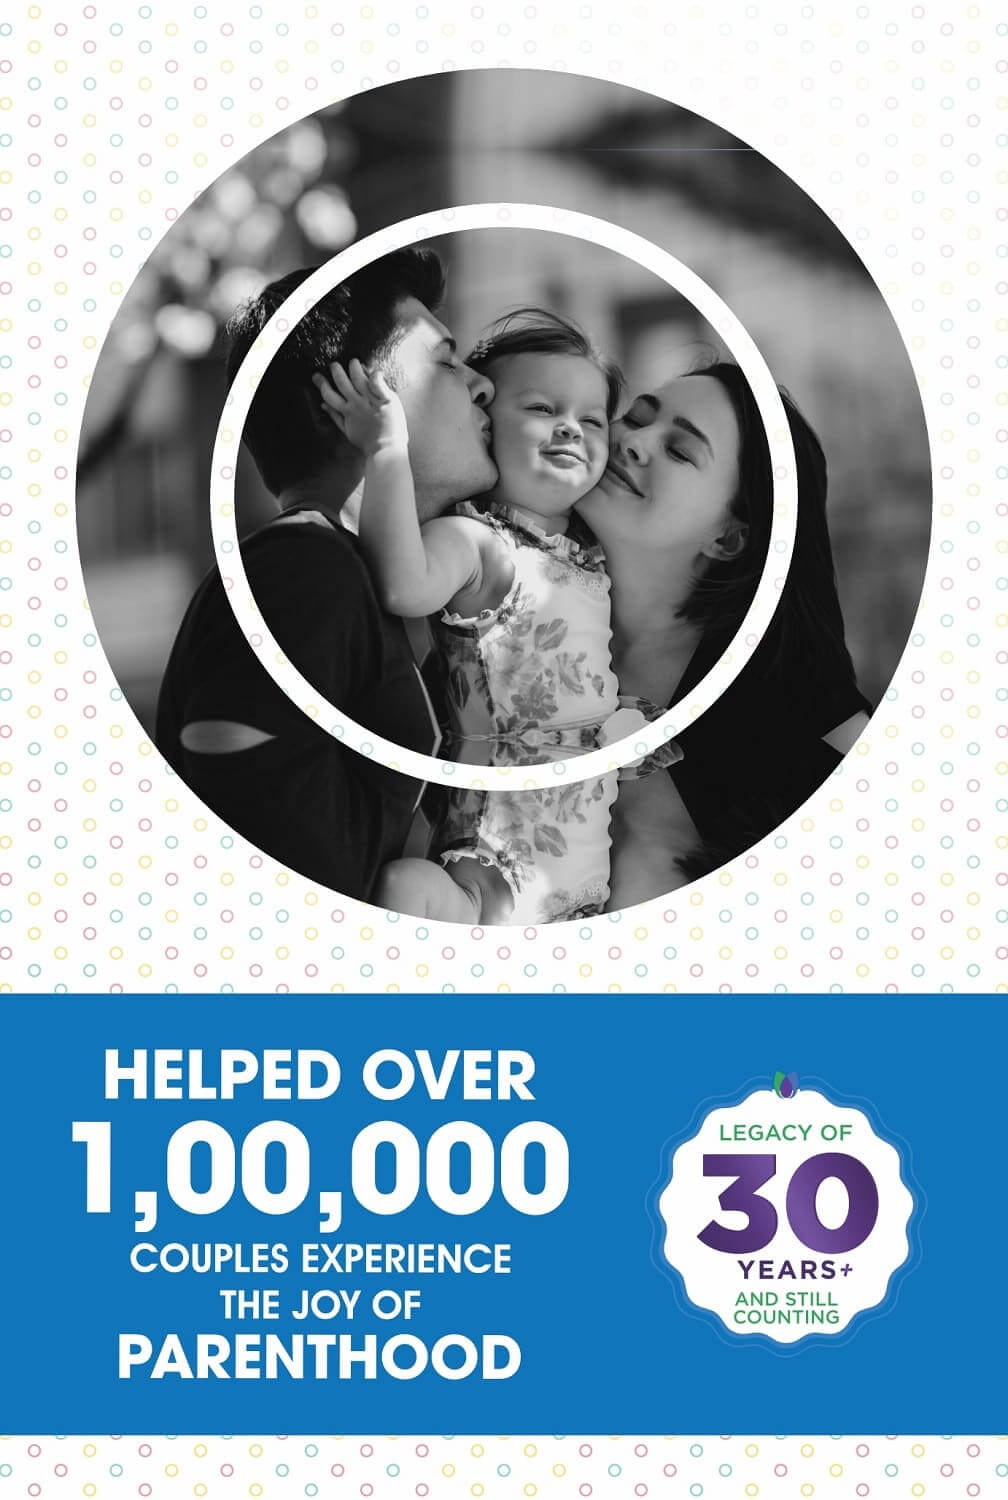 Milann helped over 100000 couples experience the joy of parenthood using IVF.